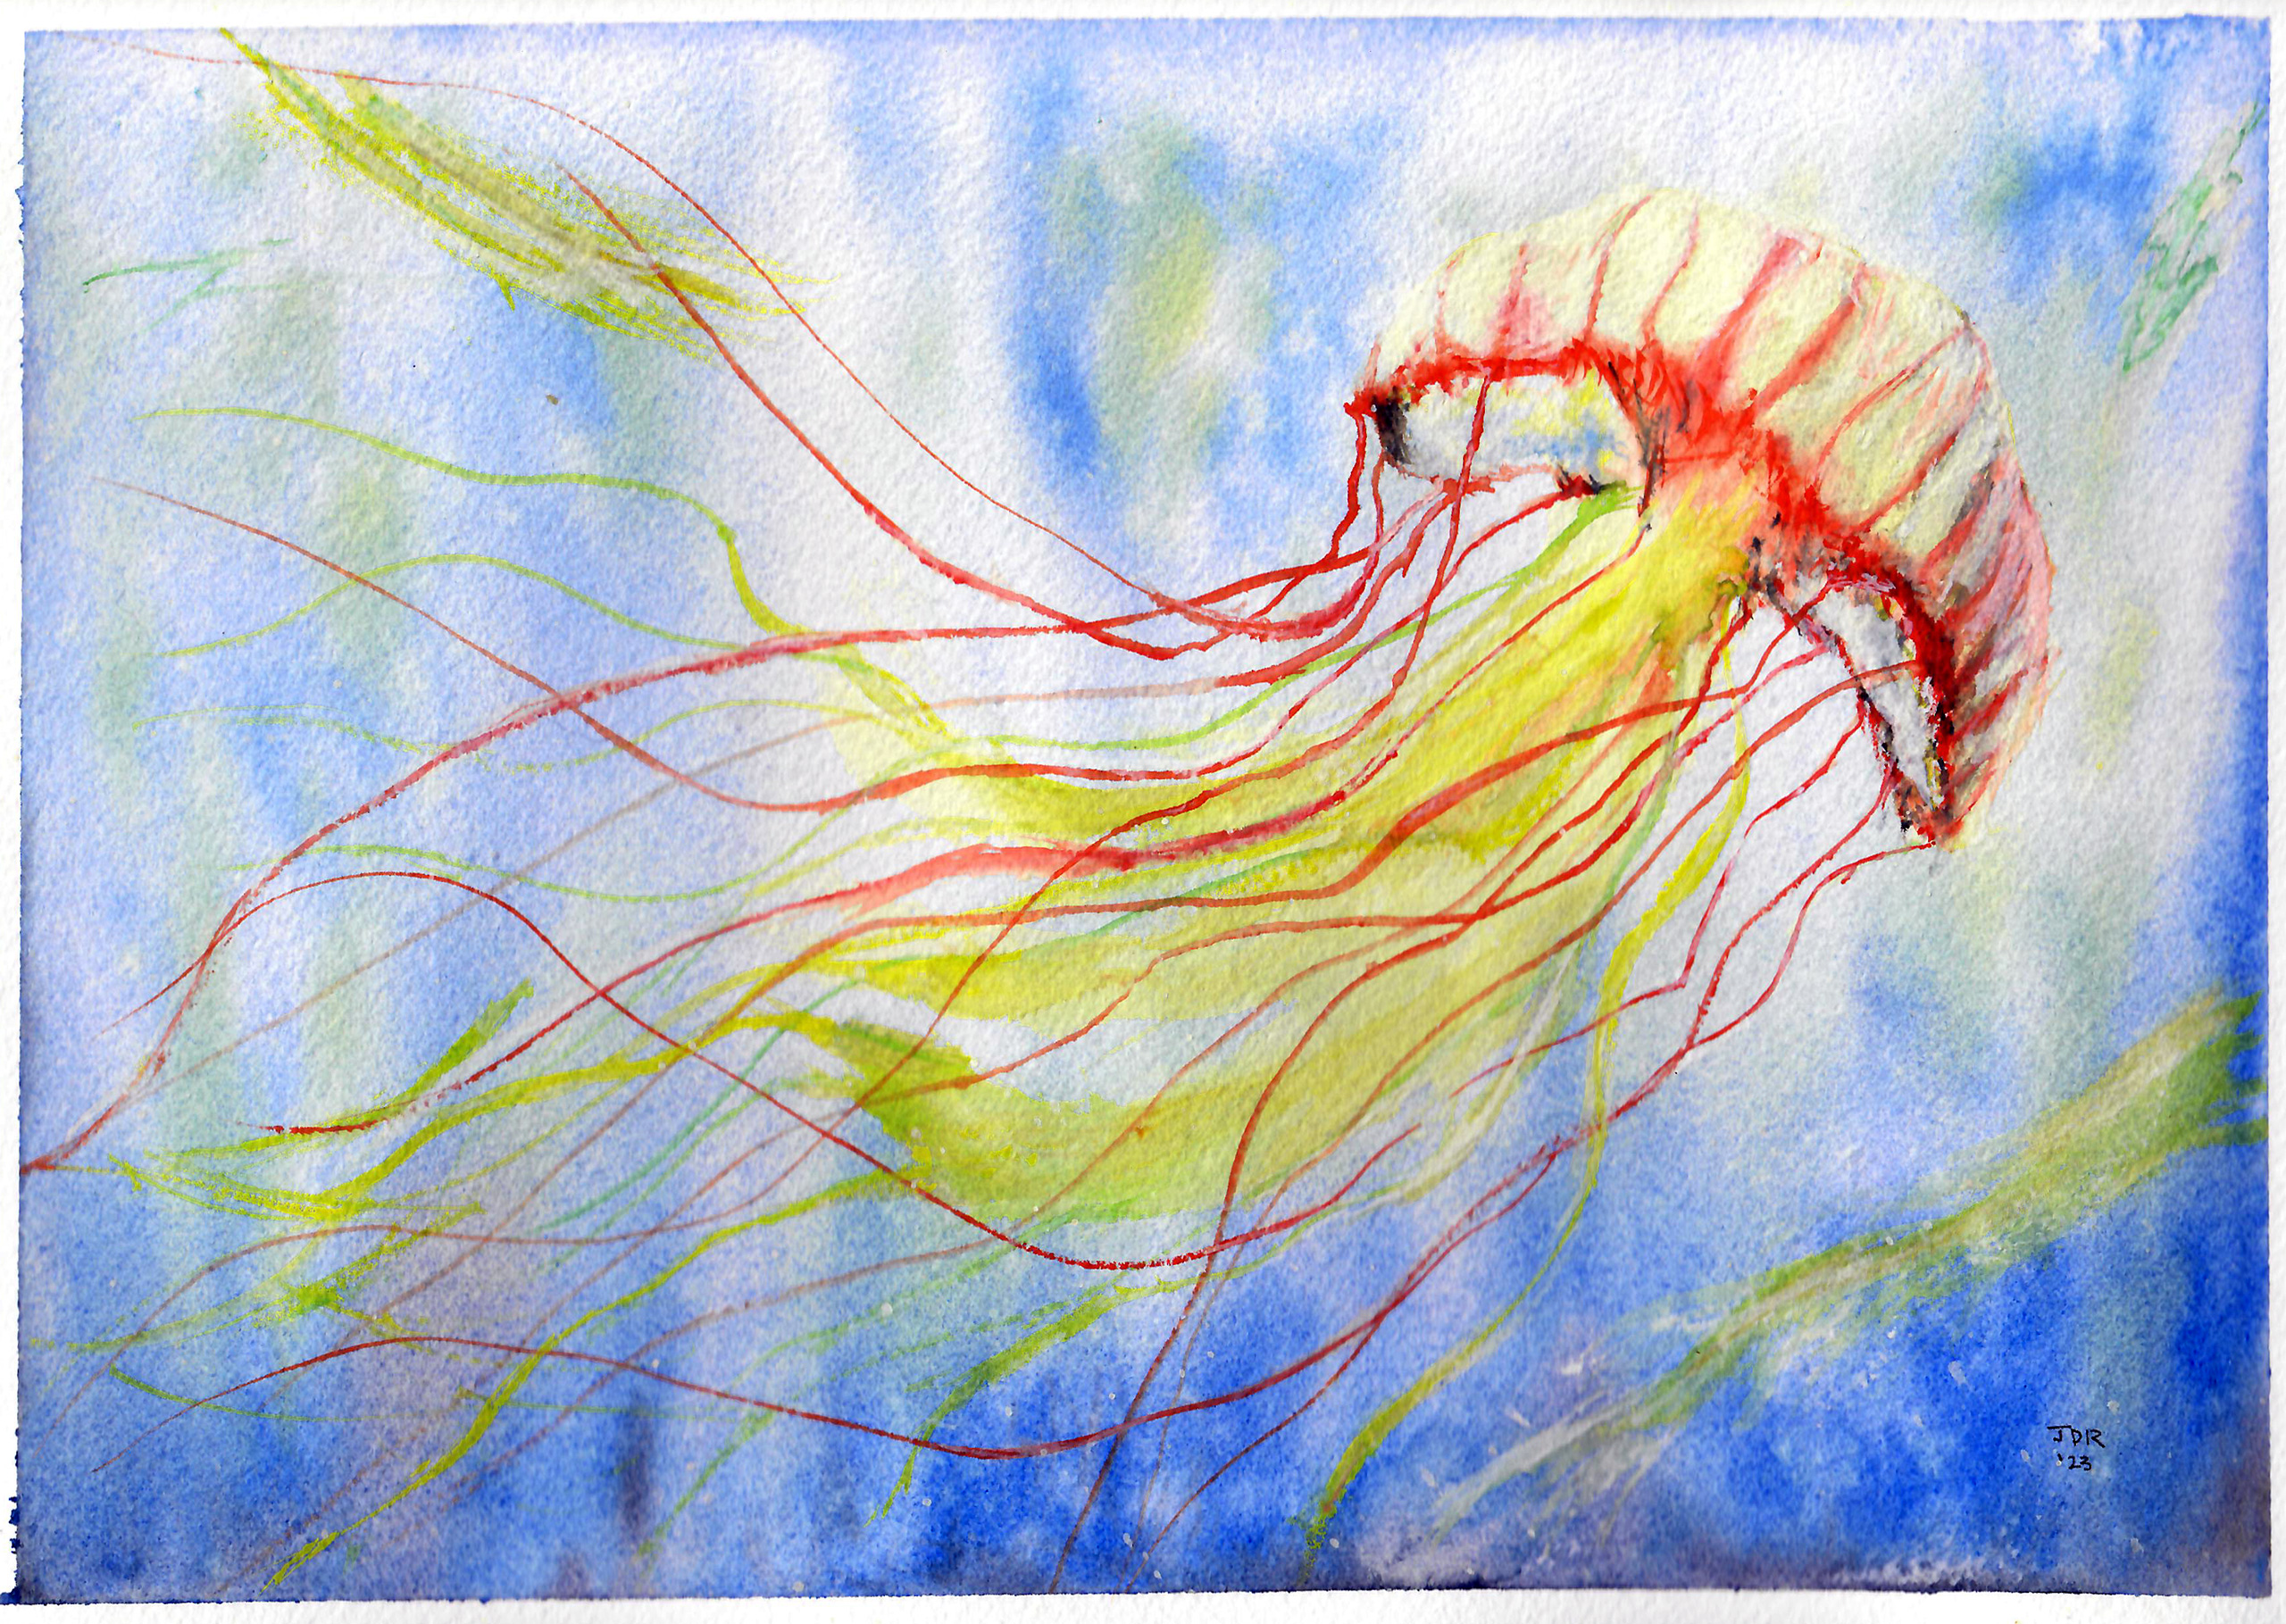 [my full painting of a jellyfish]